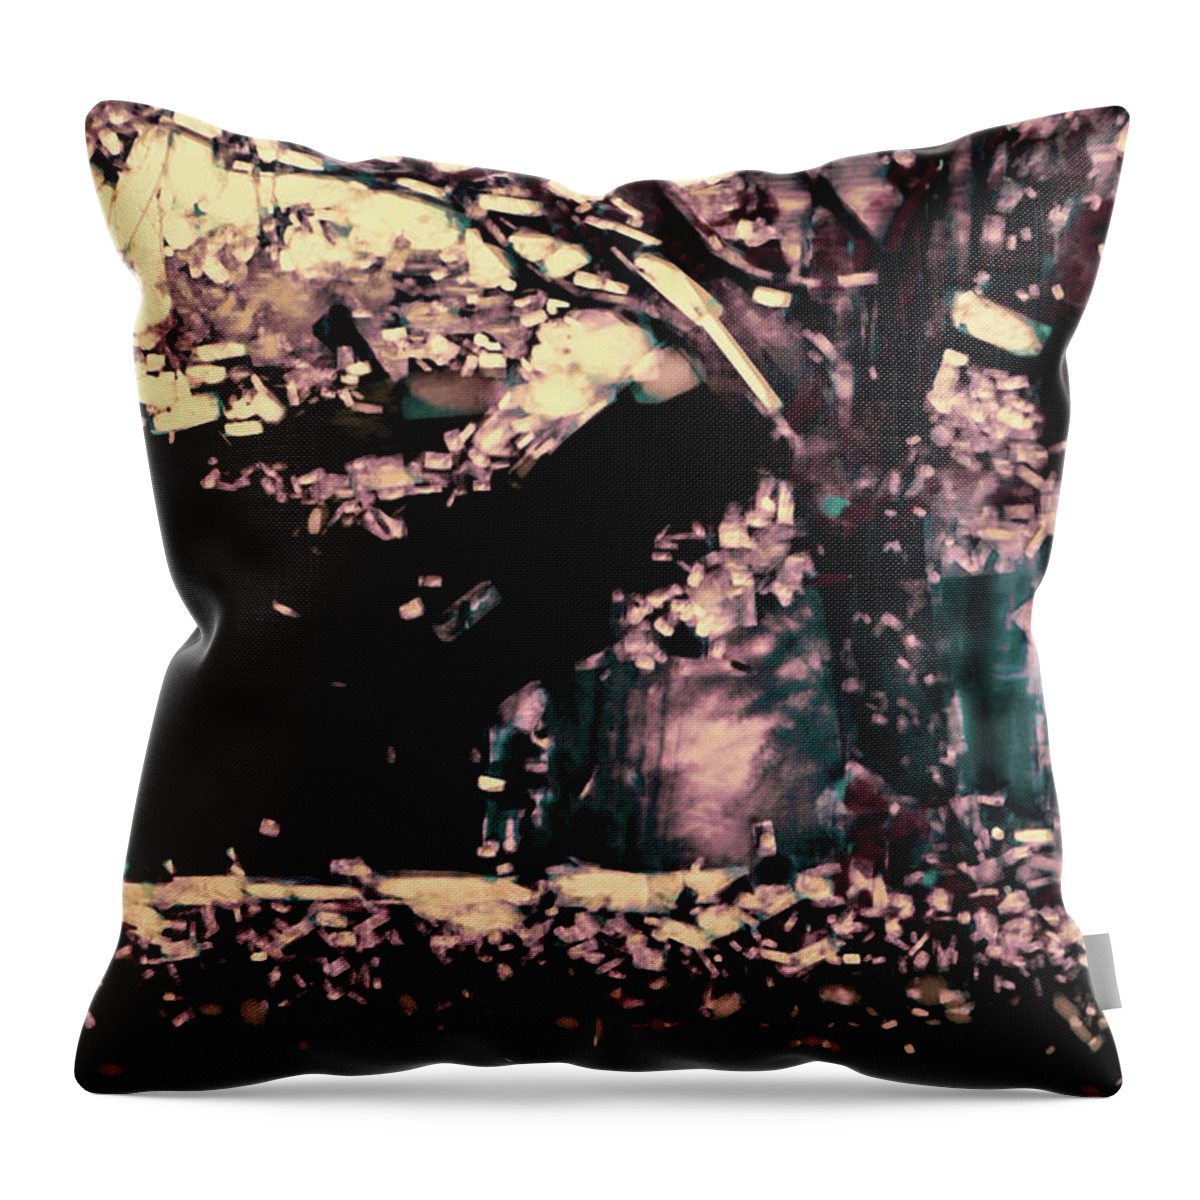 Surreal Throw Pillow featuring the digital art Once Upon a Dream by Susan Maxwell Schmidt